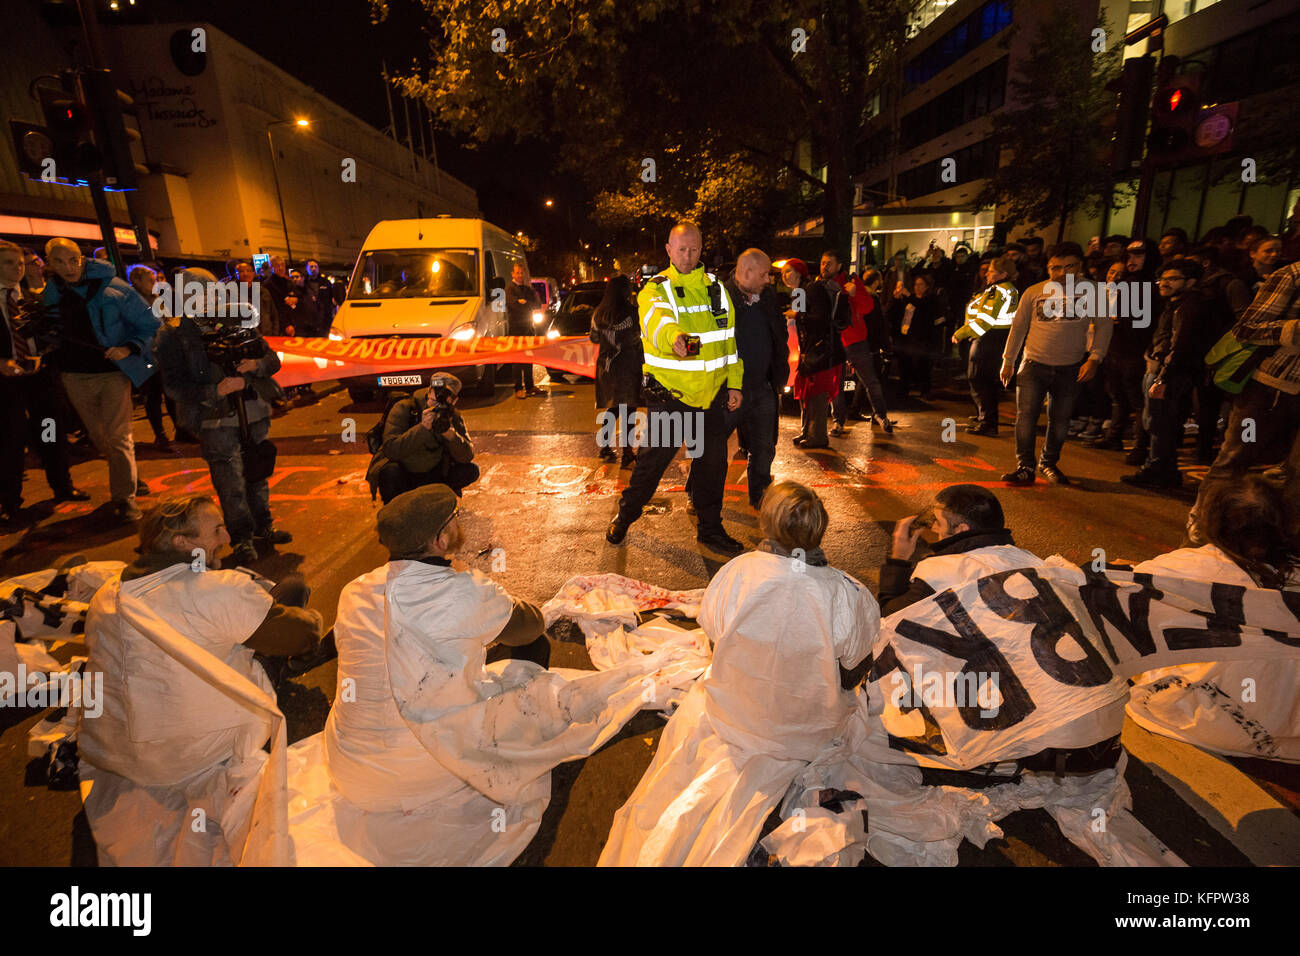 London, UK. 31st Oct, 2017. ‘Stop Killing Londoners’ environmental campaign activists perform a direct action road block in Baker Street during evening rush hour to demand urgent attention to prevent premature deaths from increasing city air pollution. Credit: Guy Corbishley/Alamy Live News Stock Photo